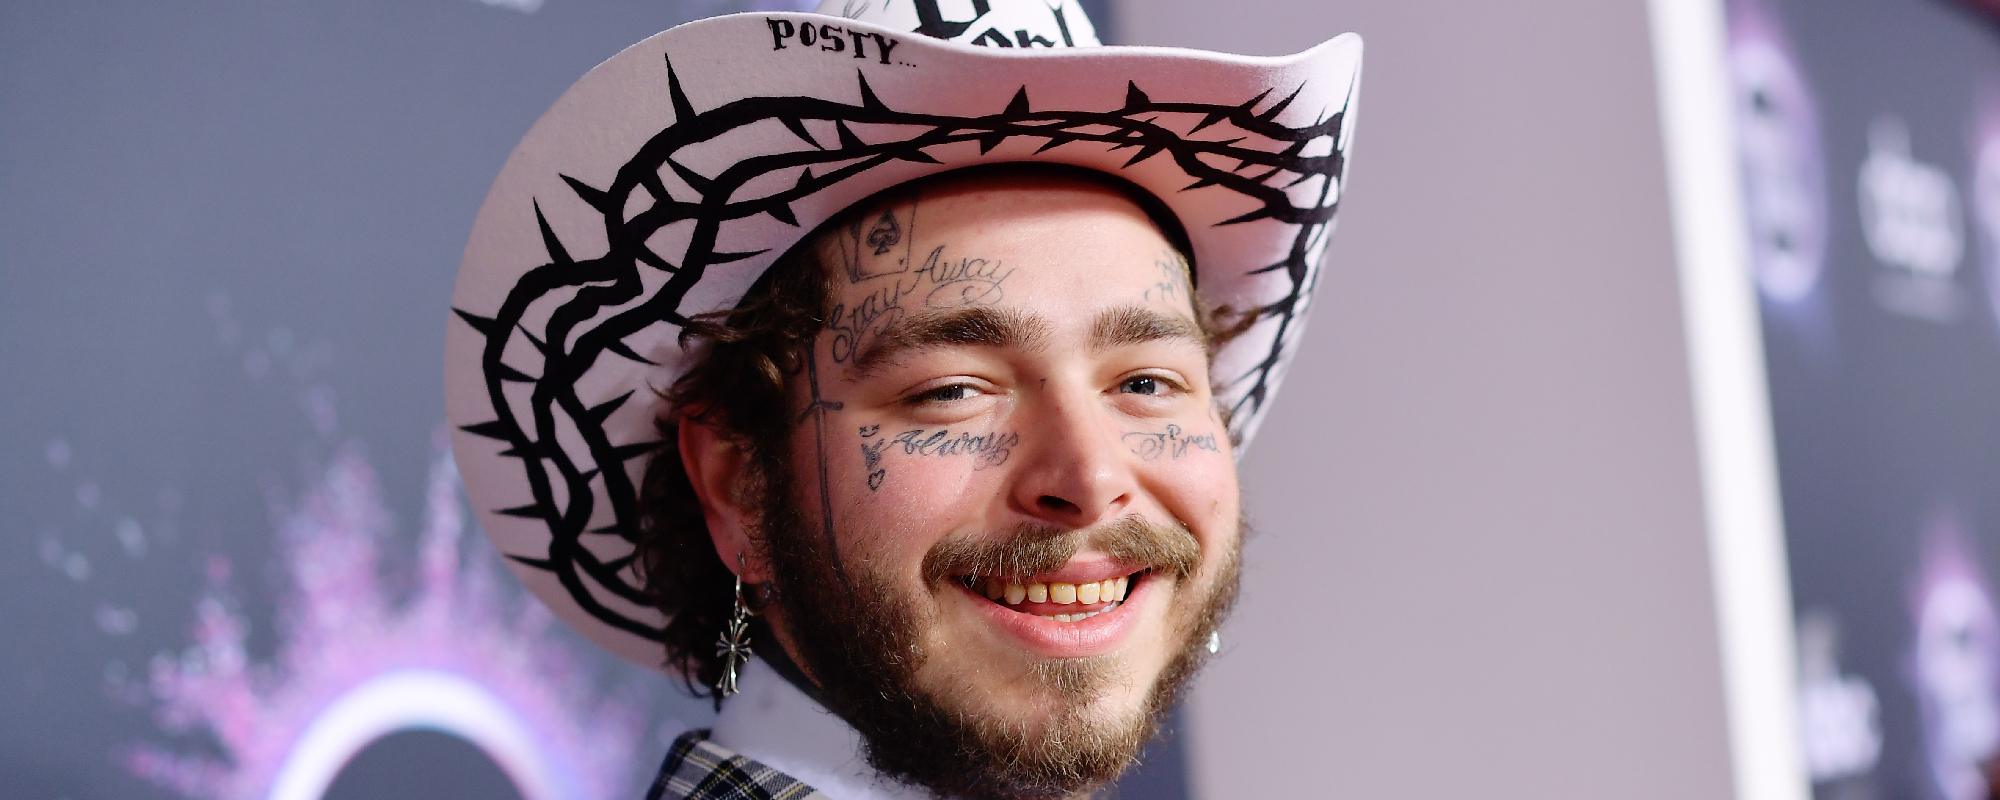 Post Malone Surprises Fans at the Ryman Auditorium With Cover of Hank Williams’ "Honky Tonk Blues"